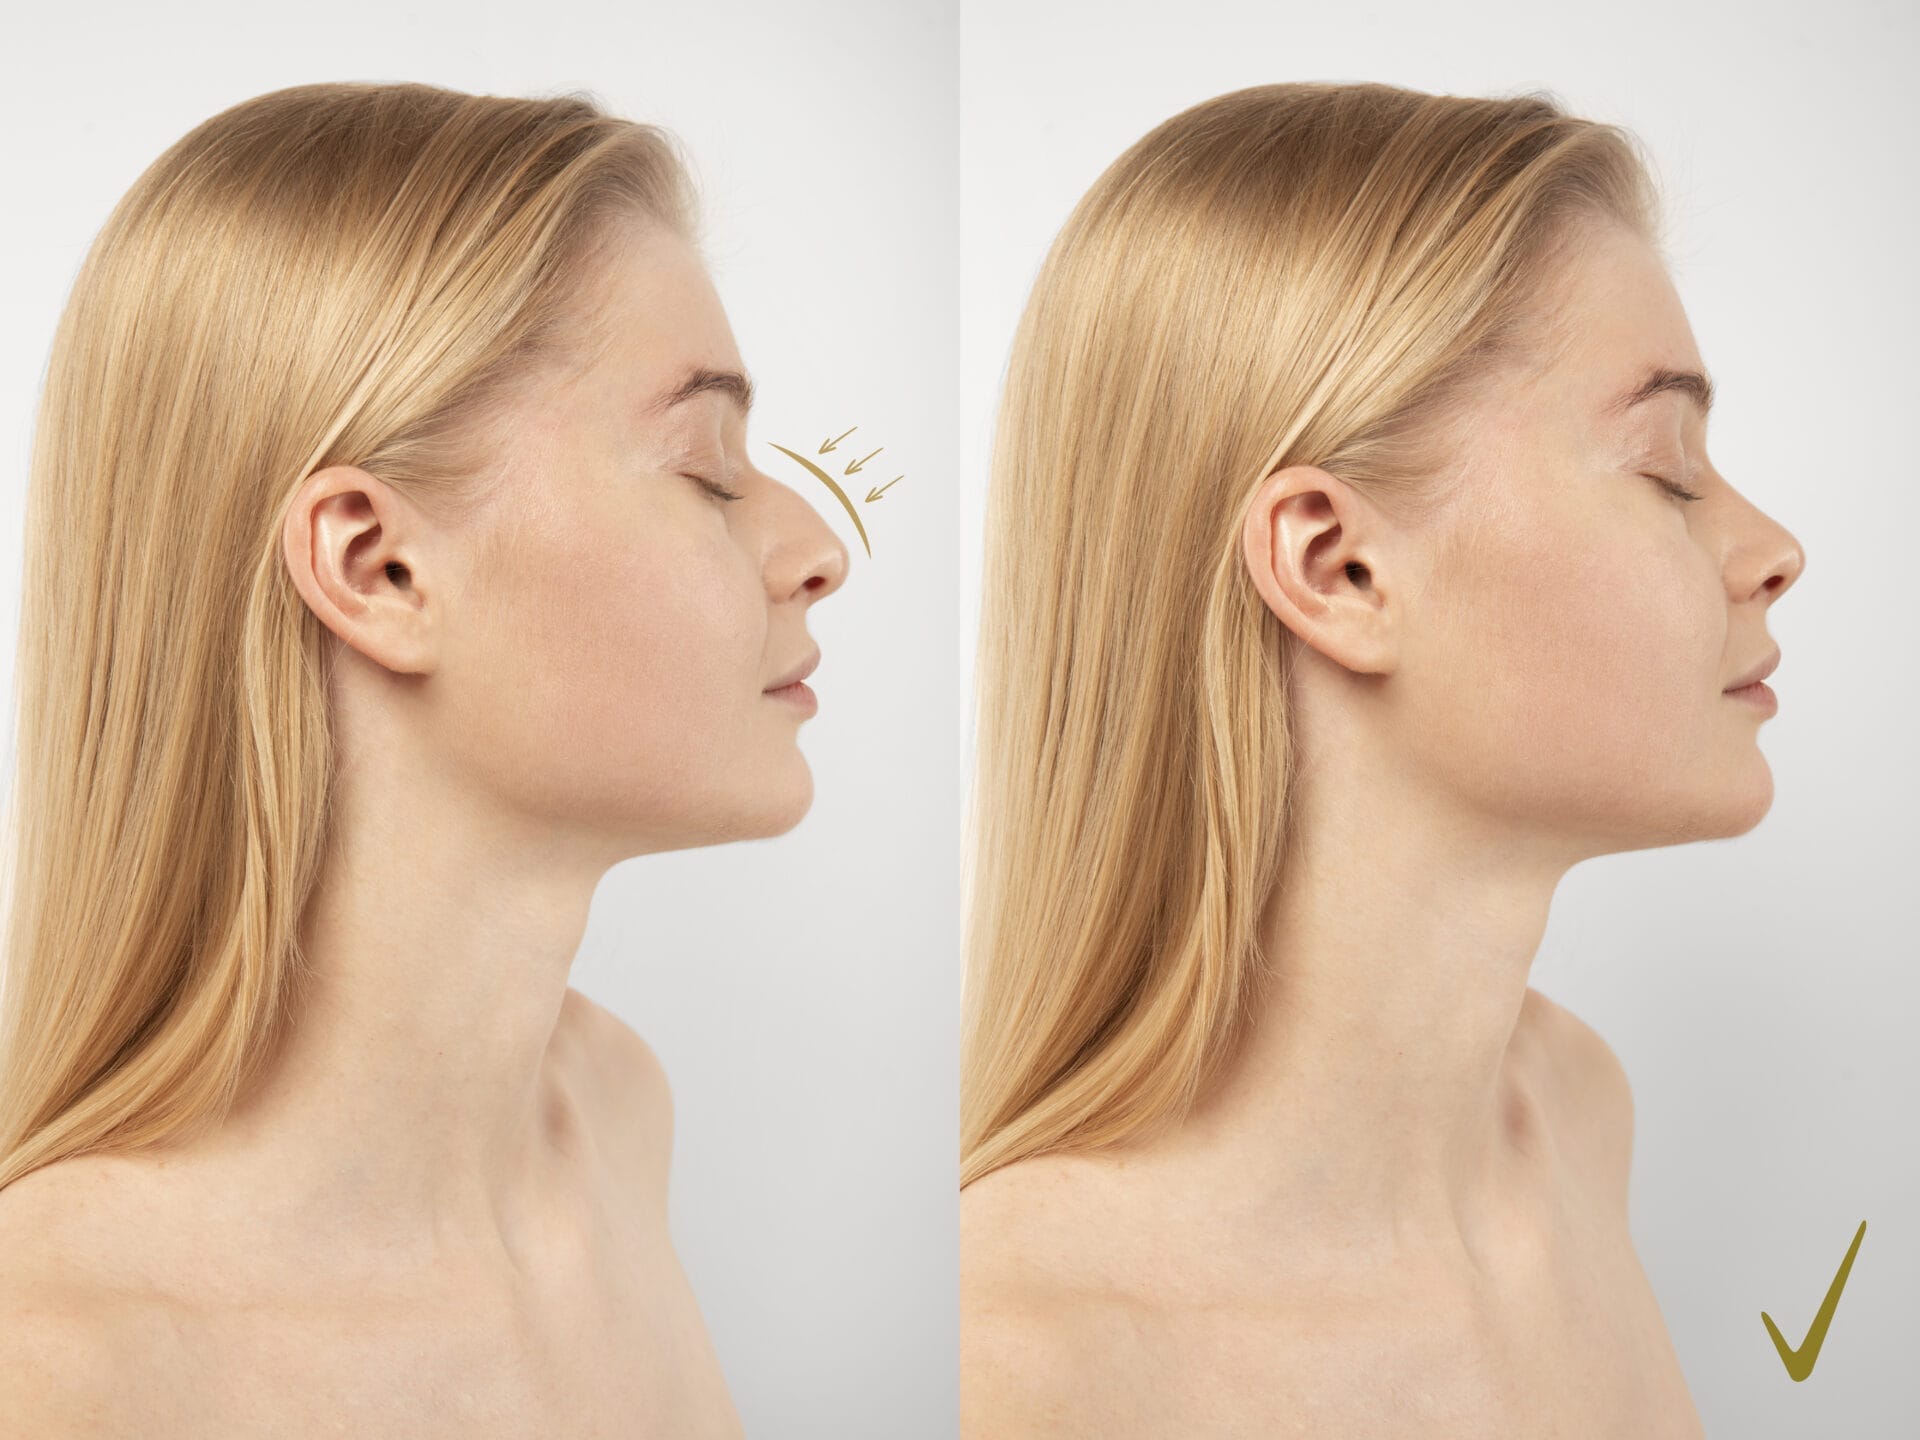 Nose Shape and Size for Rhinoplasty